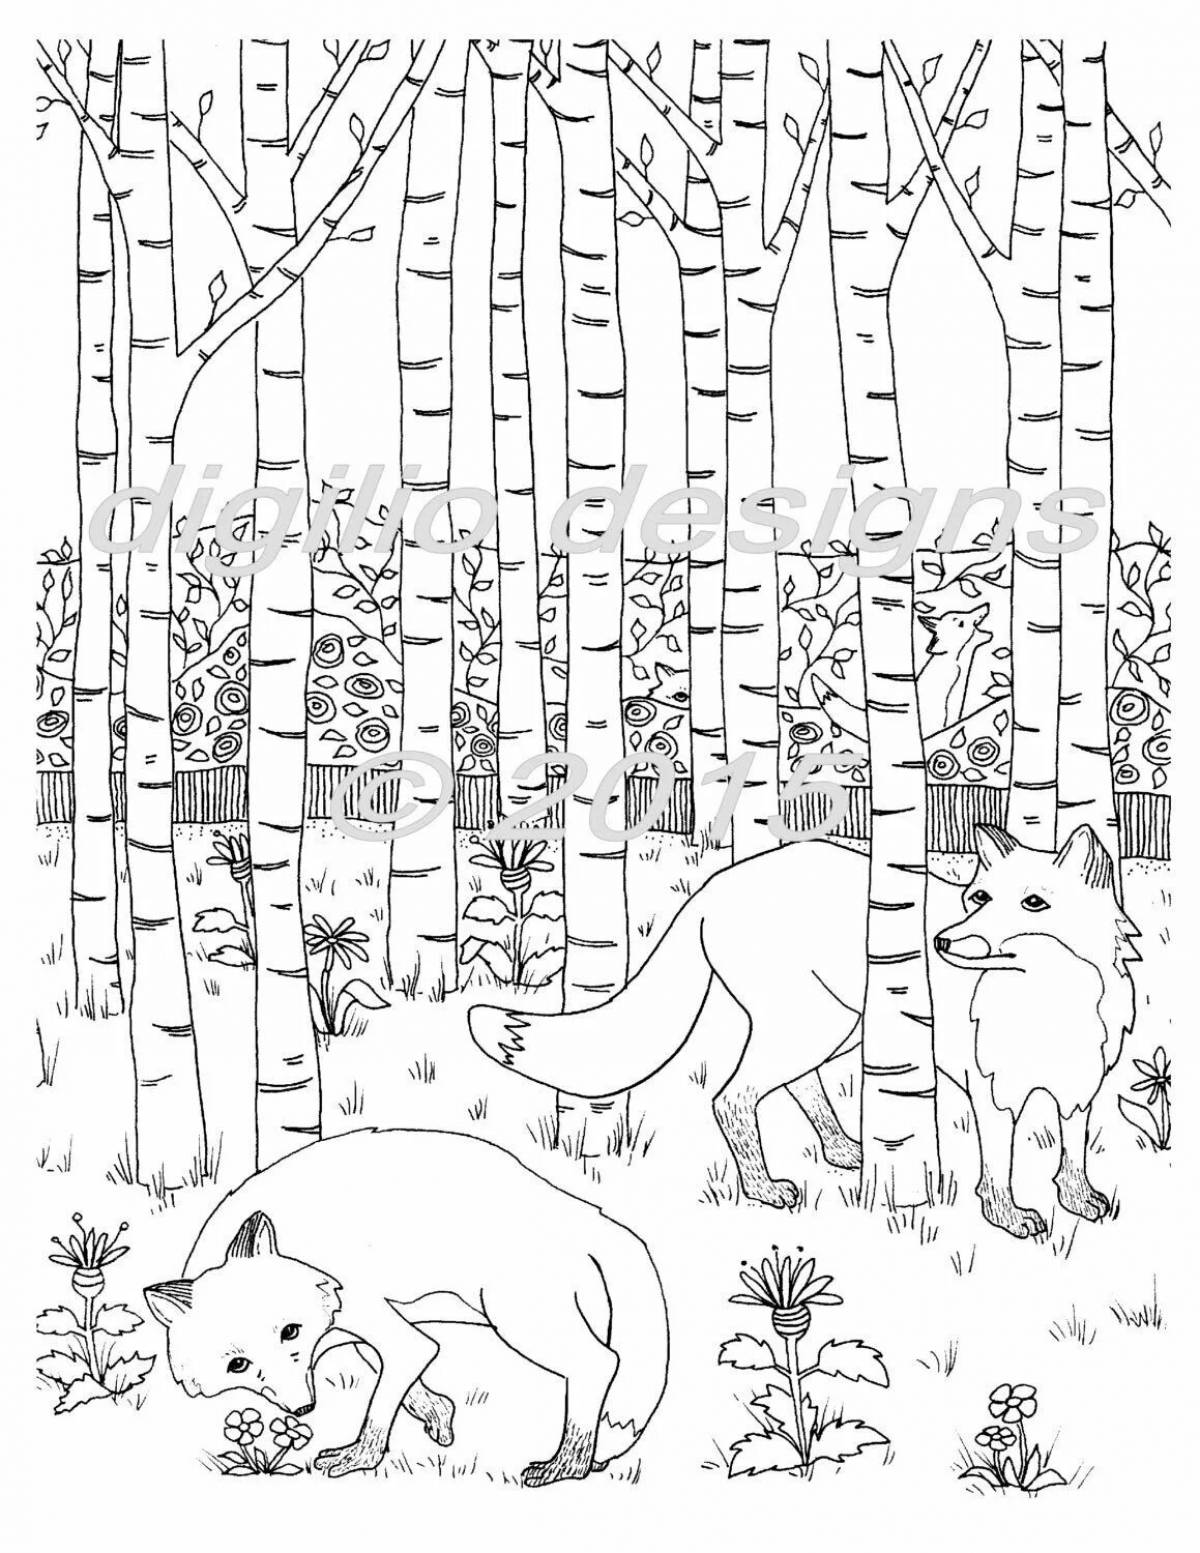 Exalted grove coloring book